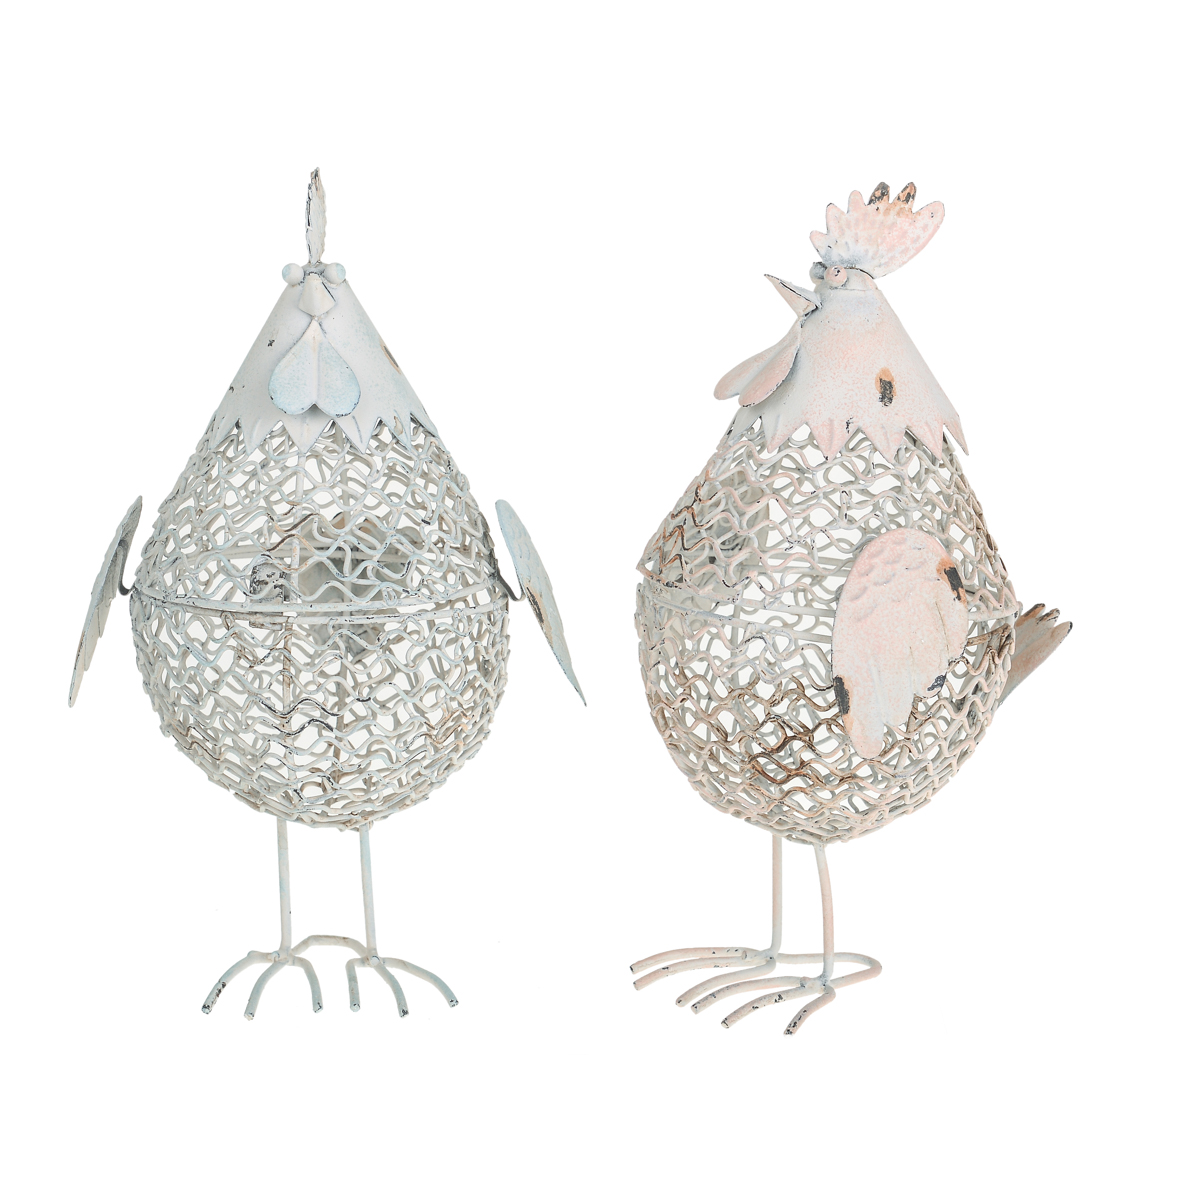 SPRING AND EASTER DECORATIONS,GALLINA RETE CONTEN 21H CM